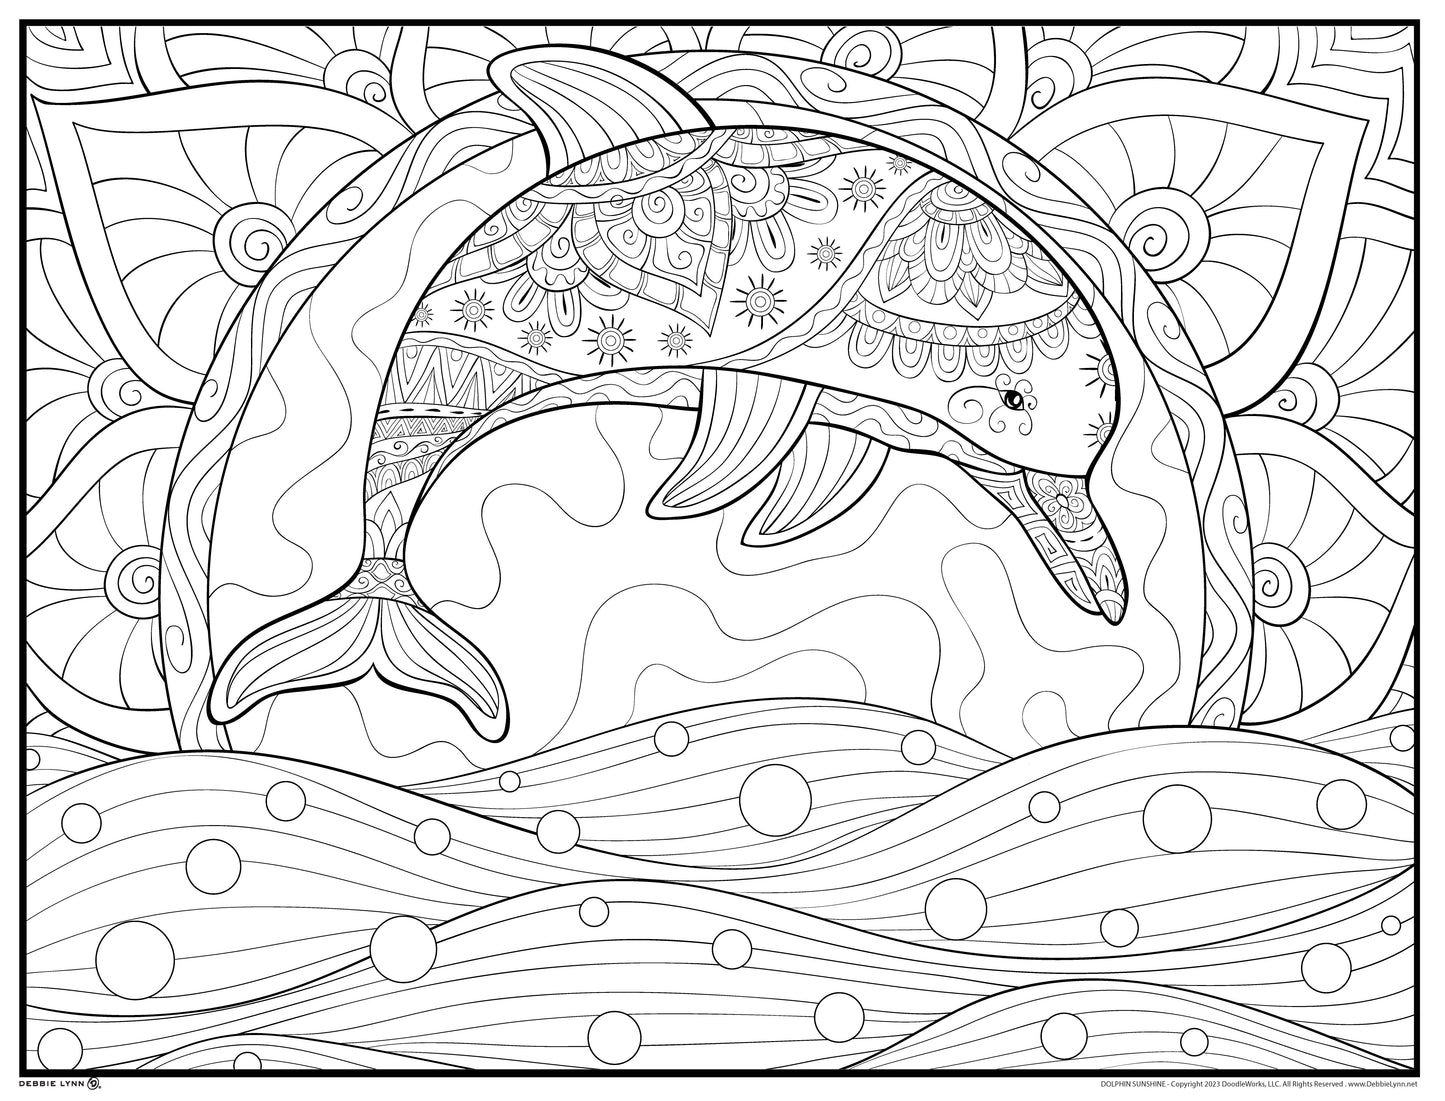 Dolphin Sunshine Personalized Giant Coloring Poster 46"x60"